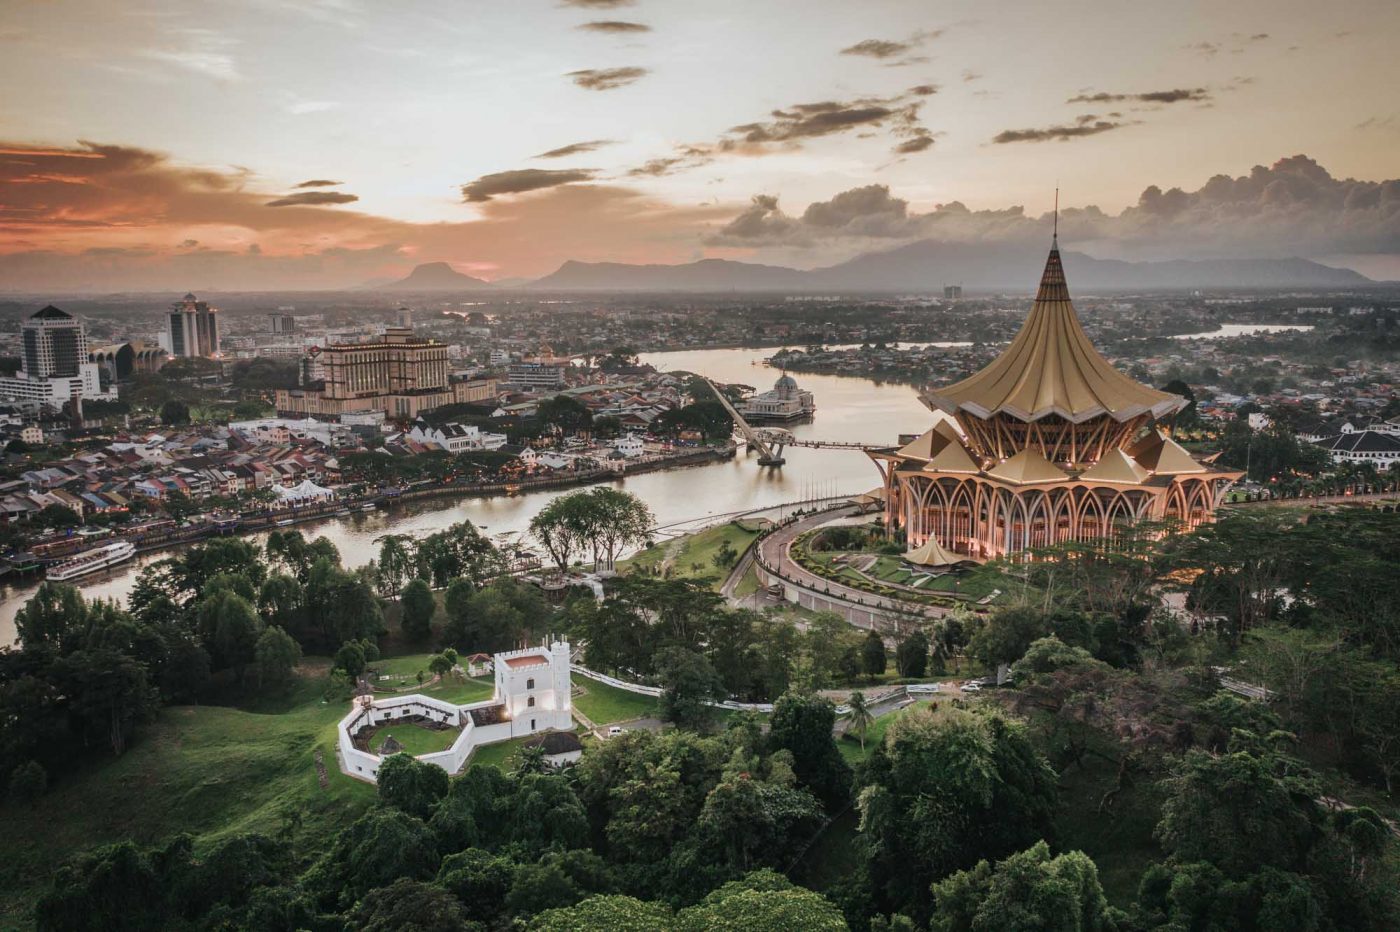 Notes on the built environment of Kuching, Sarawak in Malaysian Borneo